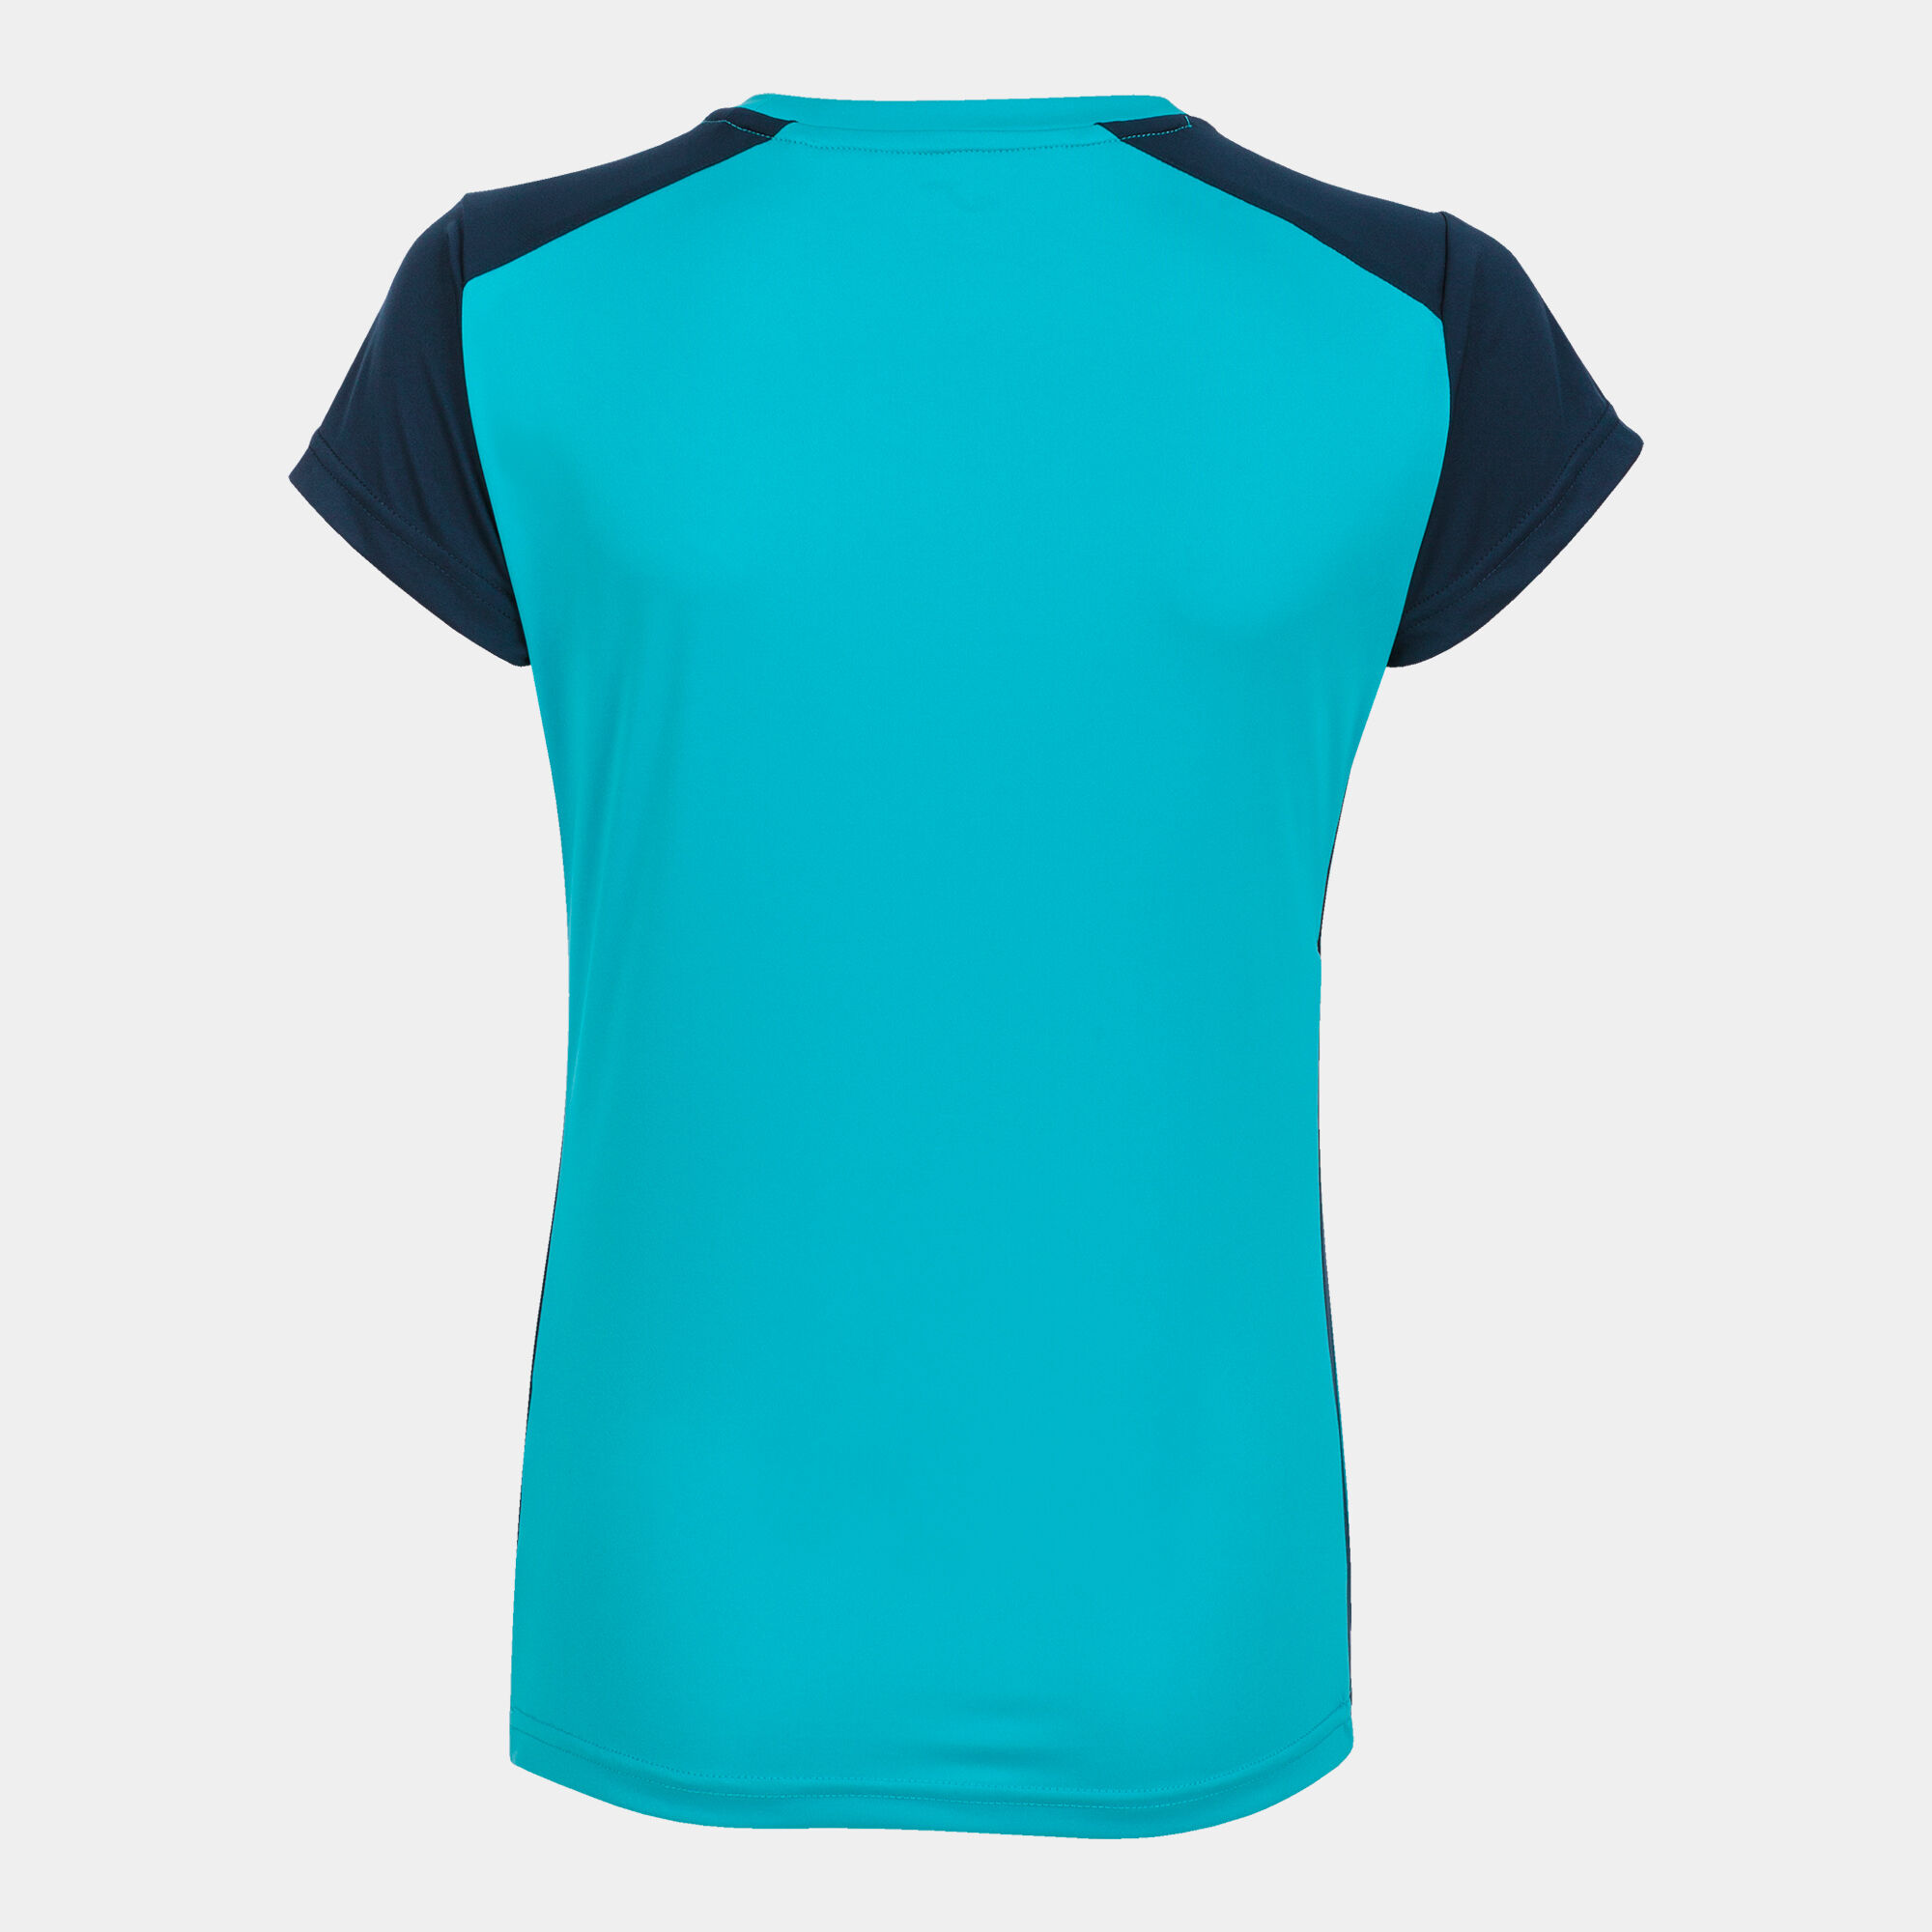 MAILLOT MANCHES COURTES FEMME RECORD II TURQUOISE FLUO BLEU MARINE